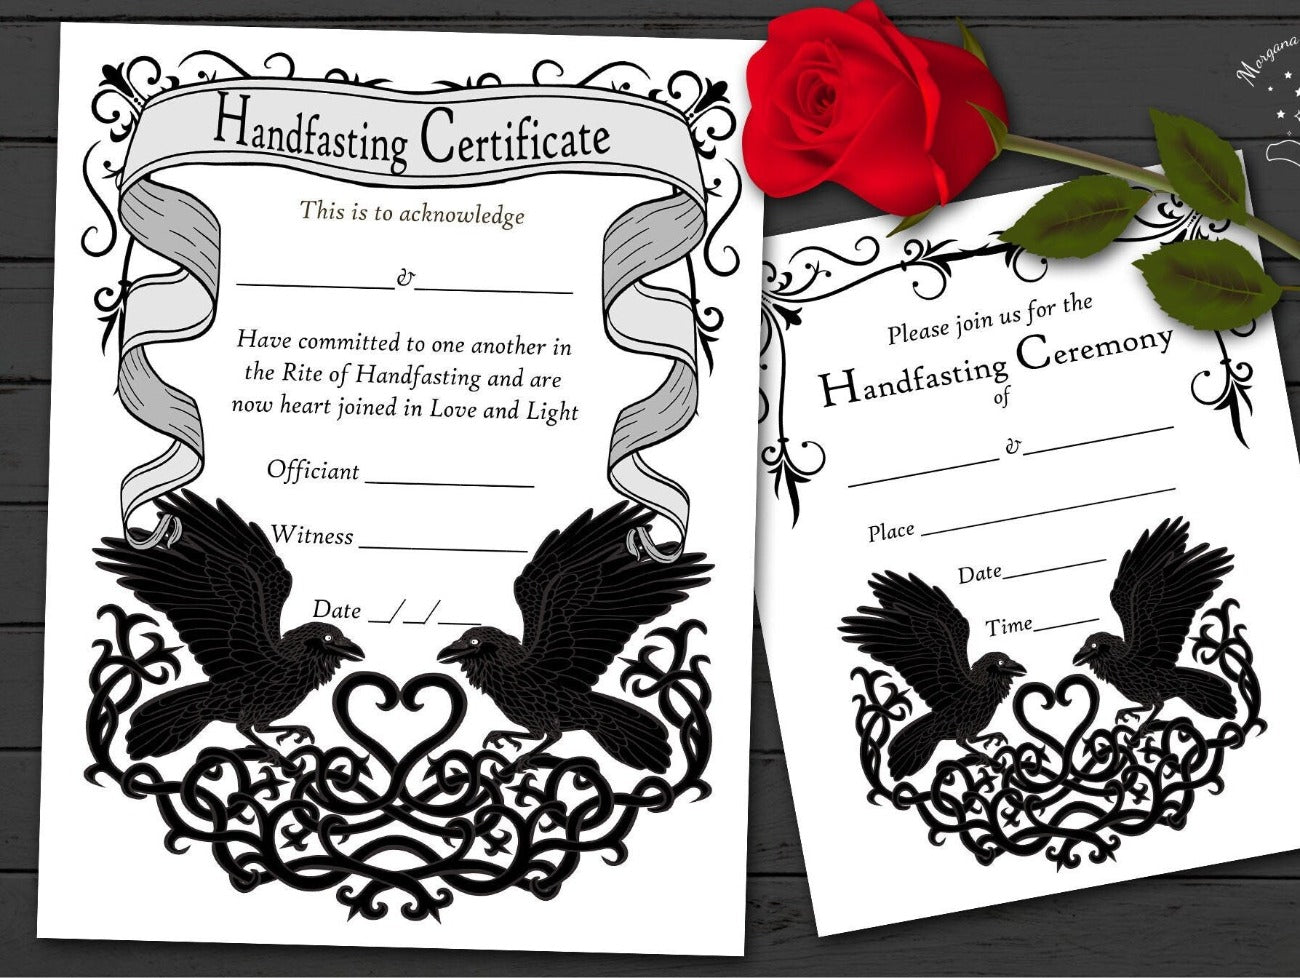 HANDFASTING CERTIFICATE & INVITATION, Printable Raven Love, Wicca Pagan Wedding Ceremony Certificate, Marriage Parchment, Cords and Vows